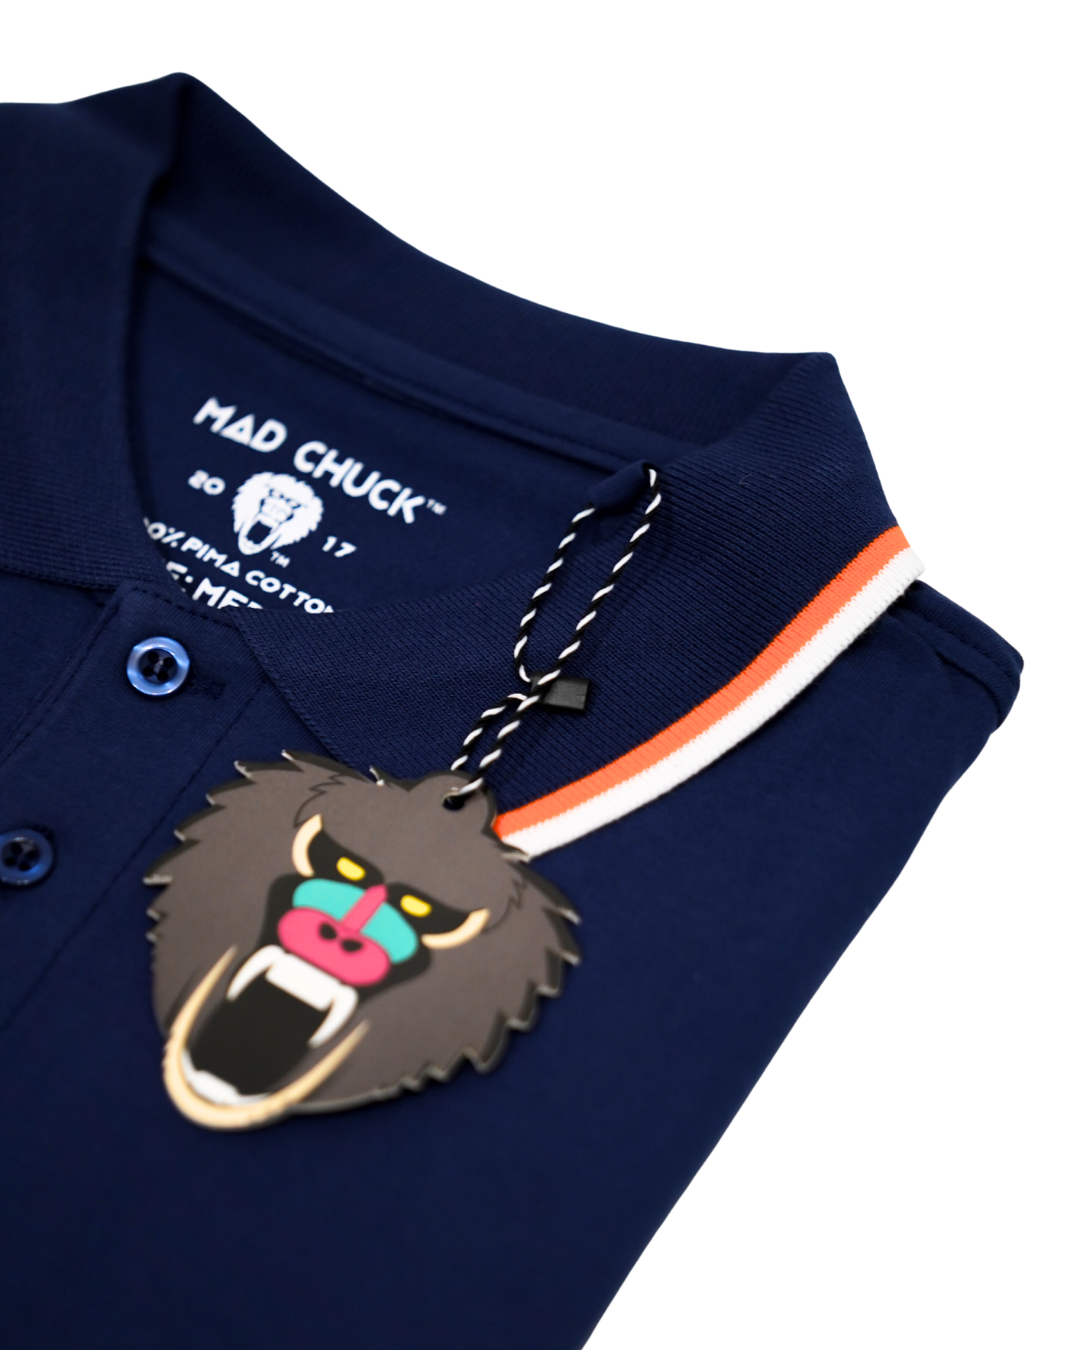 NAVY POLO WITH NEW RUBBER PATCH - Mad Chuck™